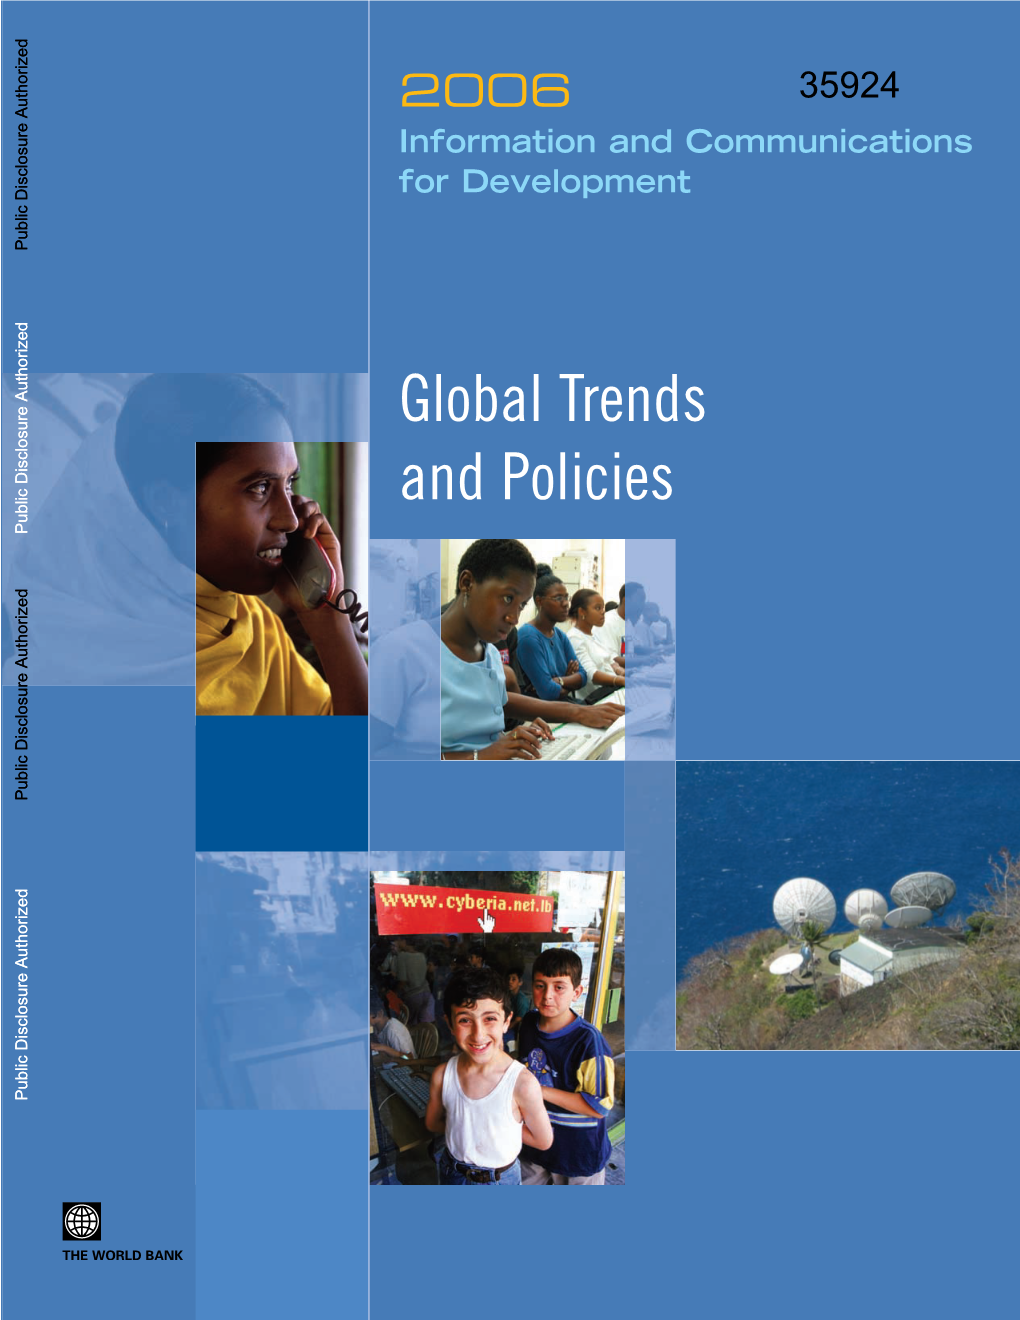 Information and Communications for Development 2006: Global Trends and Policies Contains Lessons from Both Developed and Developing Countries